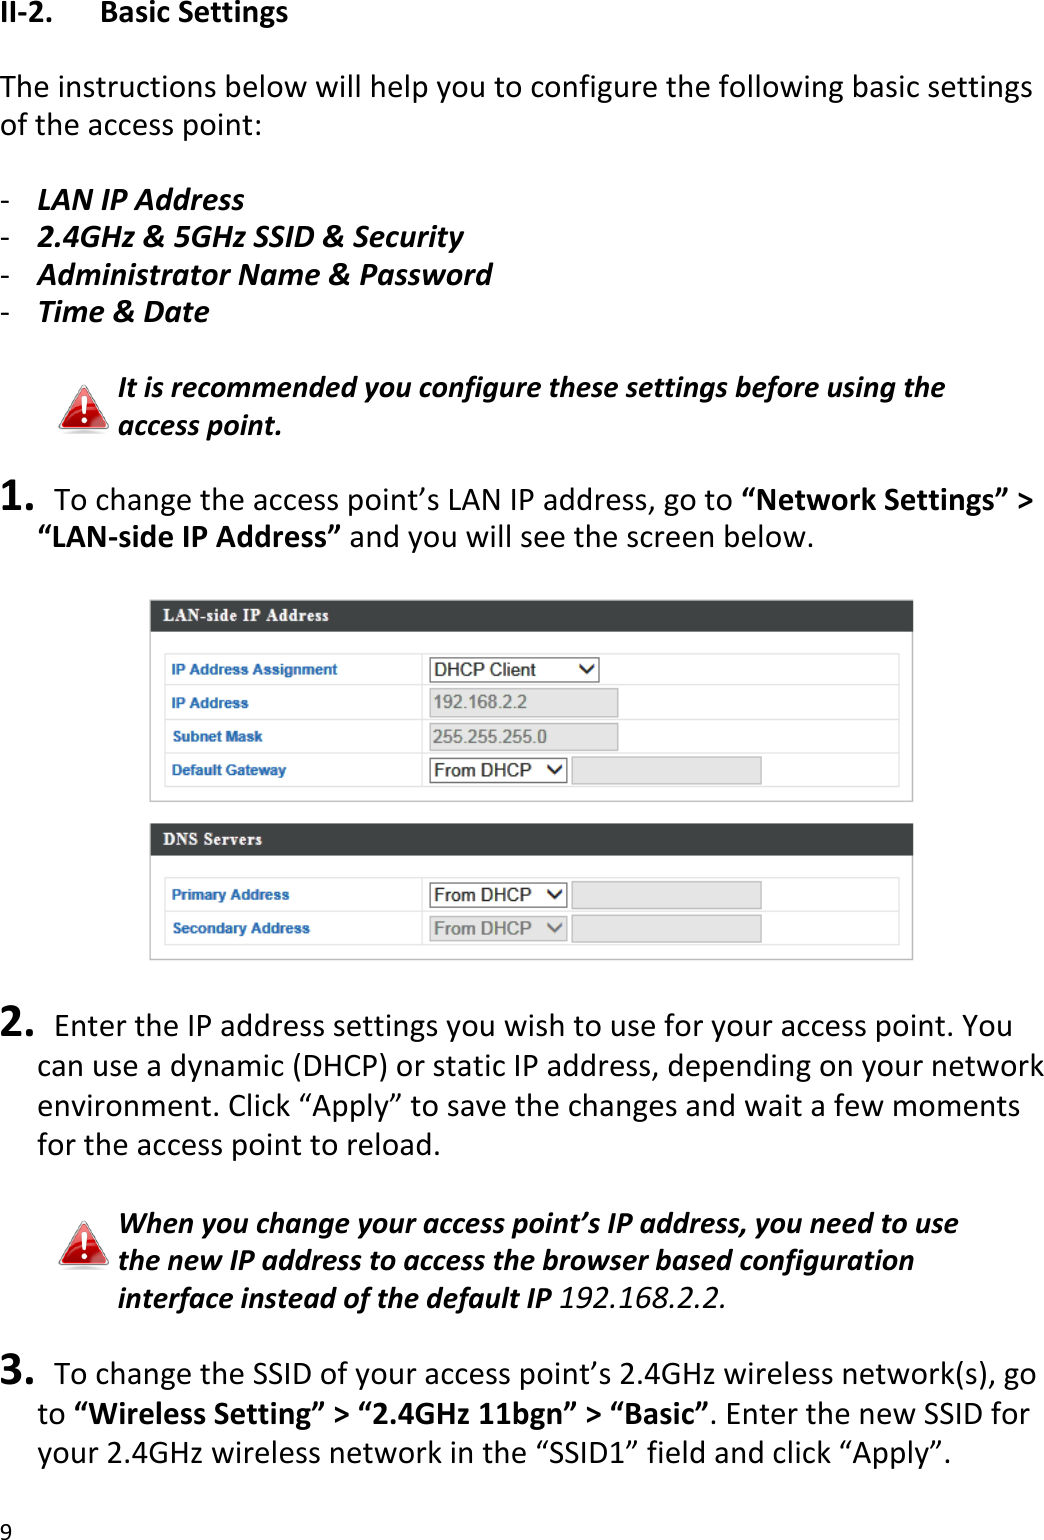 9  II-2.  Basic Settings  The instructions below will help you to configure the following basic settings of the access point:  - LAN IP Address - 2.4GHz &amp; 5GHz SSID &amp; Security - Administrator Name &amp; Password - Time &amp; Date  It is recommended you configure these settings before using the access point.  1.  To change the access point’s LAN IP address, go to “Network Settings” &gt; “LAN-side IP Address” and you will see the screen below.    2.   Enter the IP address settings you wish to use for your access point. You can use a dynamic (DHCP) or static IP address, depending on your network environment. Click “Apply” to save the changes and wait a few moments for the access point to reload.  When you change your access point’s IP address, you need to use the new IP address to access the browser based configuration interface instead of the default IP 192.168.2.2.  3.  To change the SSID of your access point’s 2.4GHz wireless network(s), go to “Wireless Setting” &gt; “2.4GHz 11bgn” &gt; “Basic”. Enter the new SSID for your 2.4GHz wireless network in the “SSID1” field and click “Apply”.  